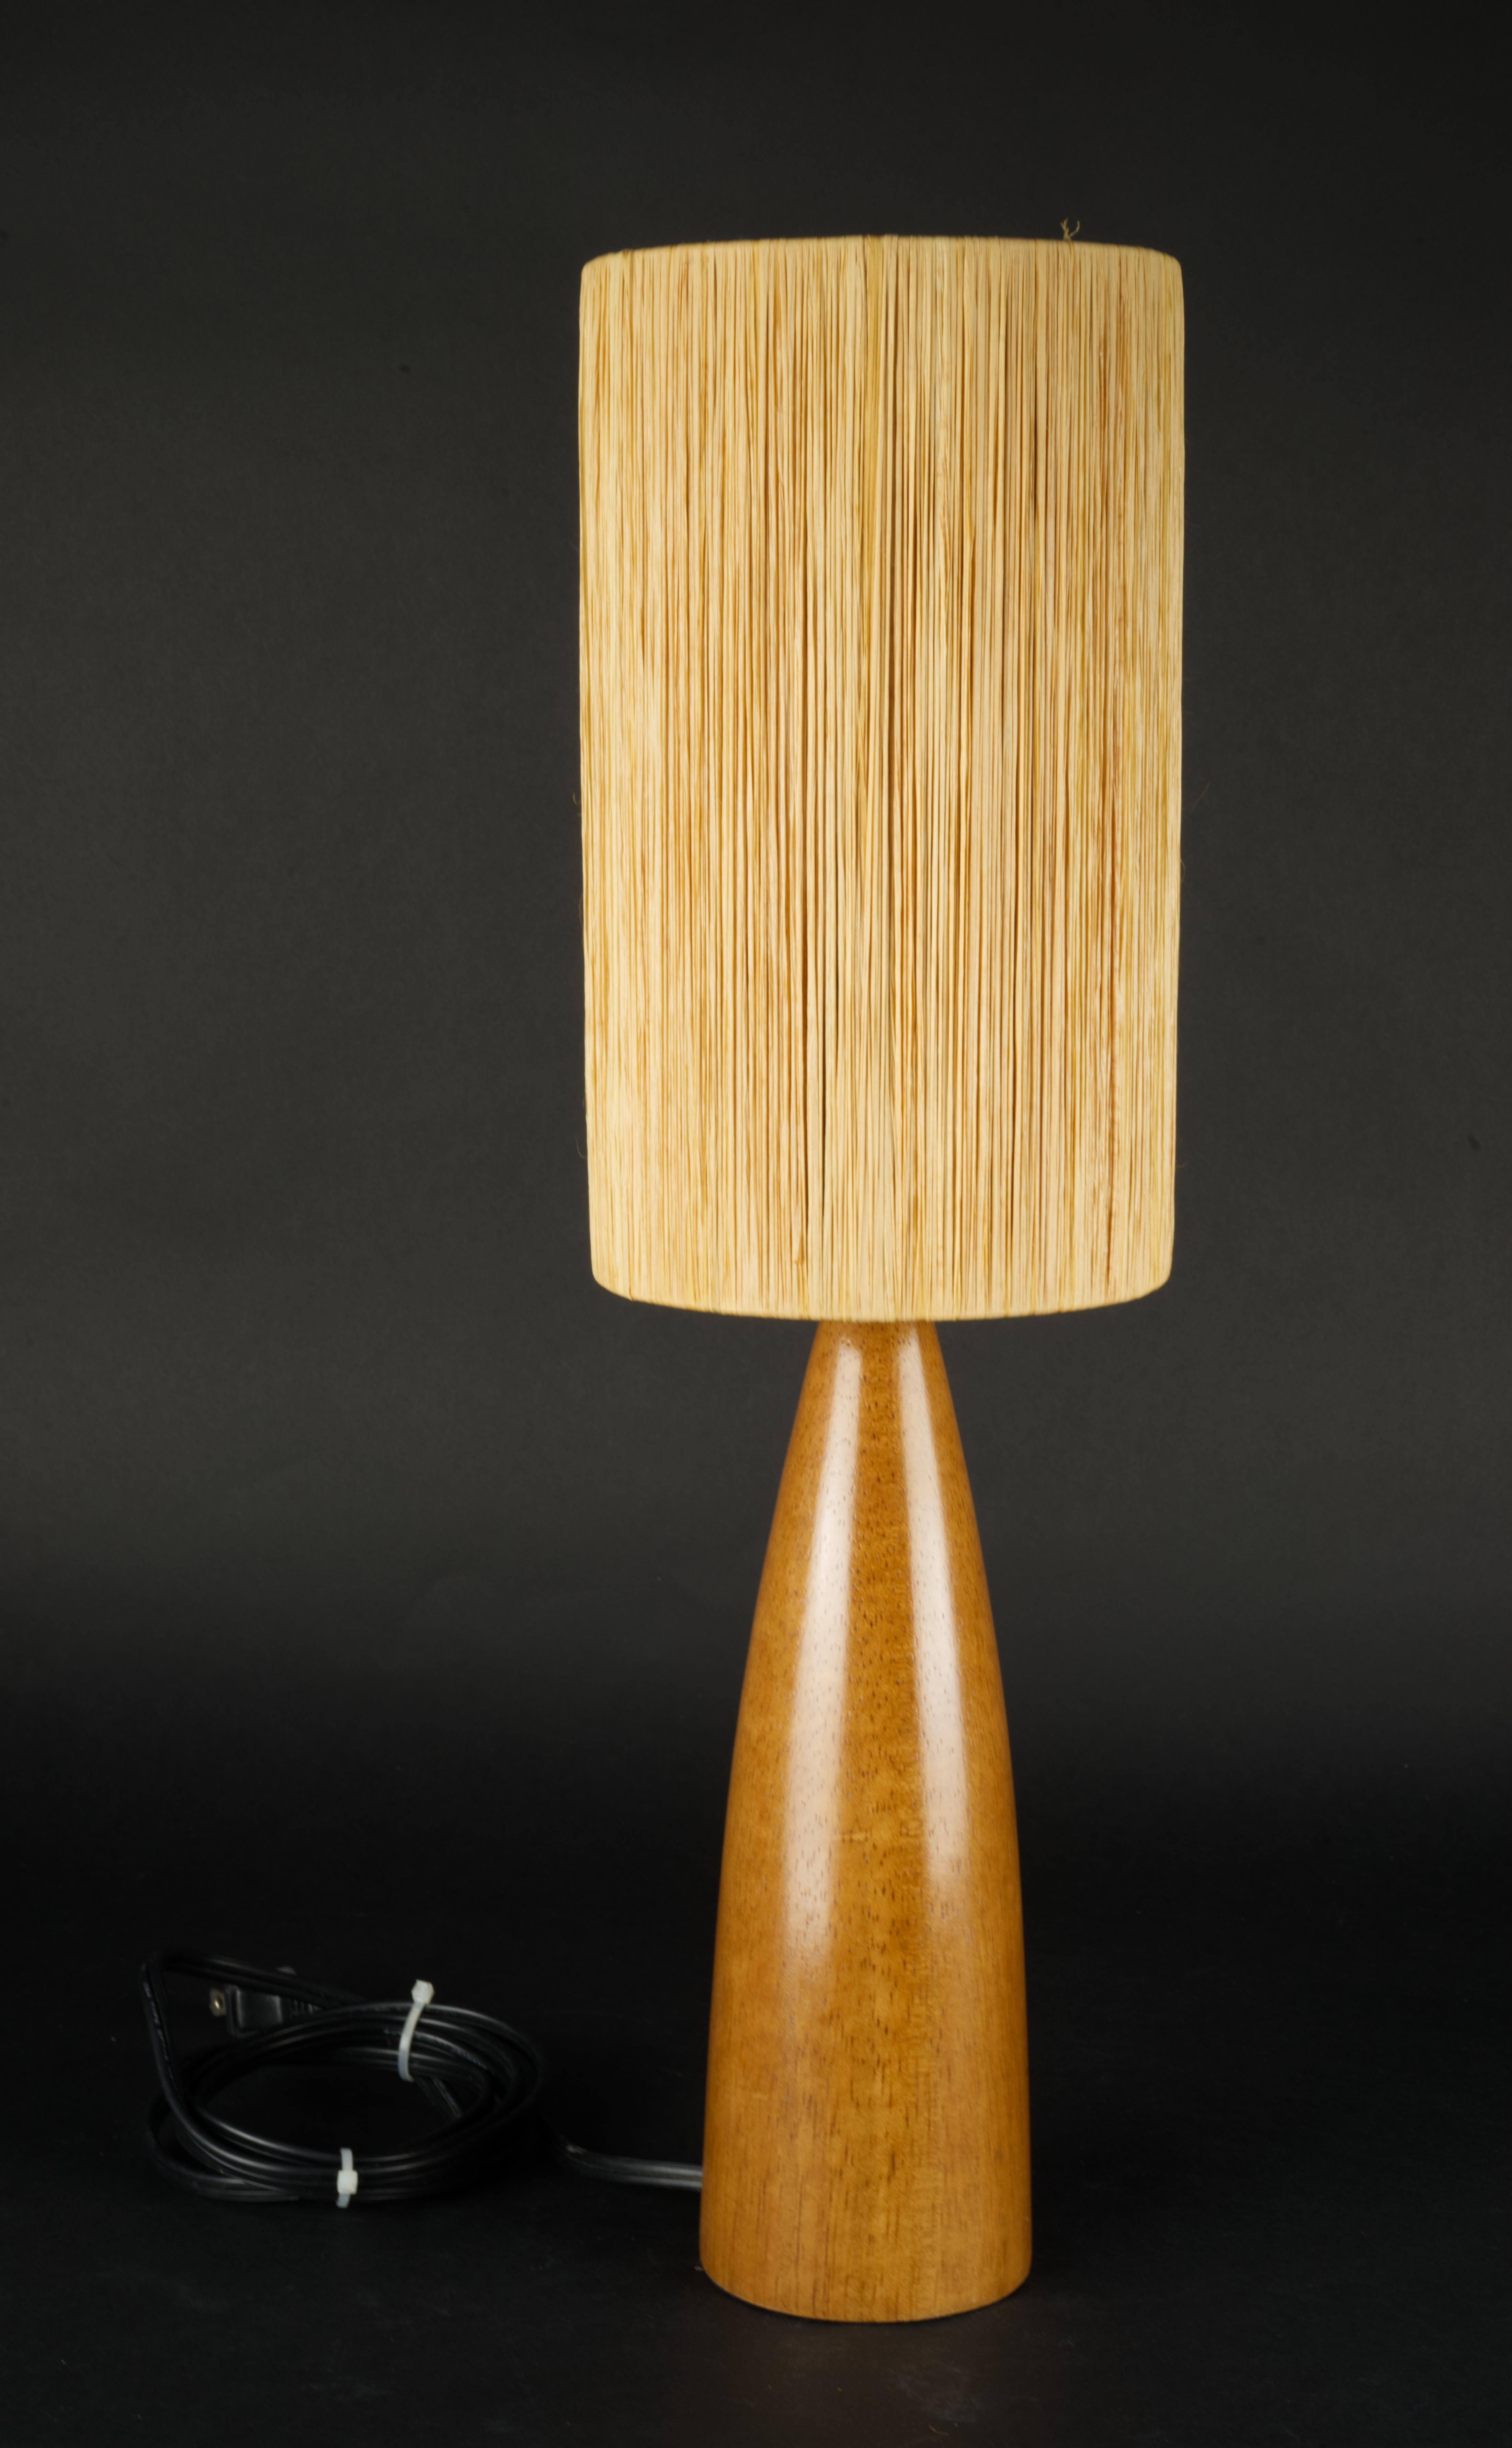 Scandinavian Modern Teak Accent Table Lamp with Original Straw Shade, Mid Centur In Good Condition For Sale In Clifton Springs, NY